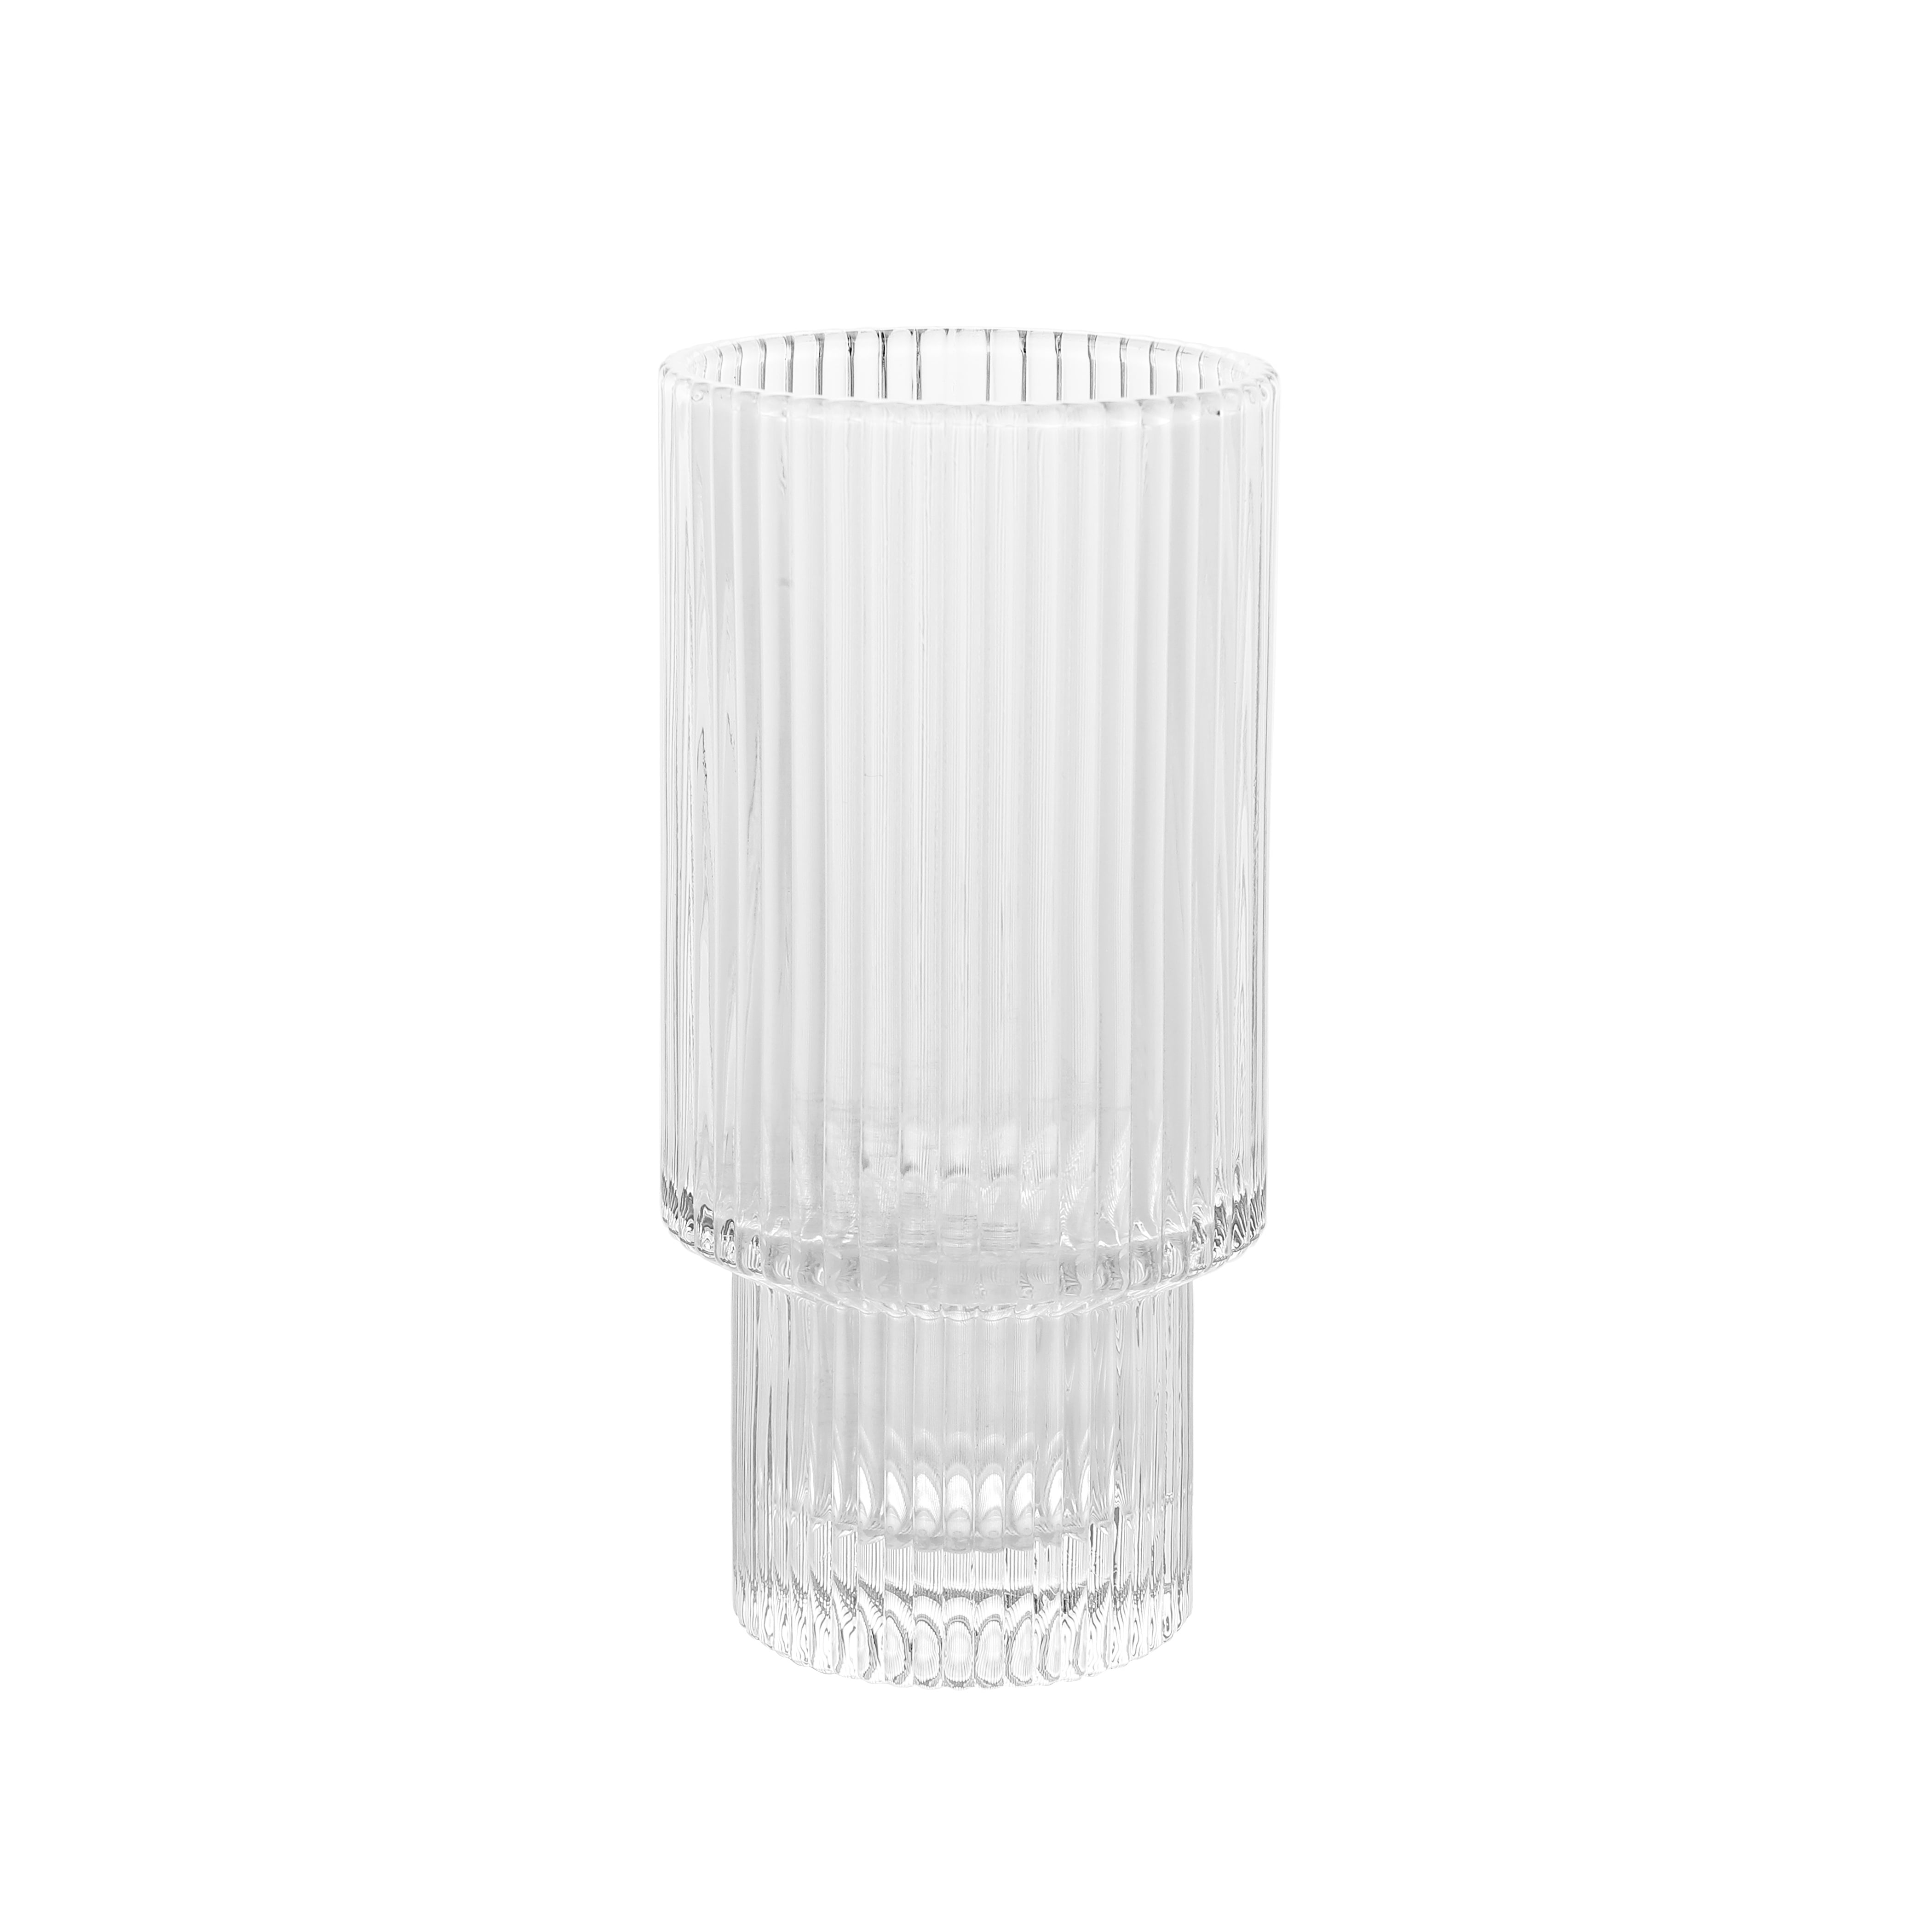 UNBRANDED CRYSTAL GLASS CUPS HEAVY BOTTOM RIBBED GLASSES SET OF 7 TEXTURED